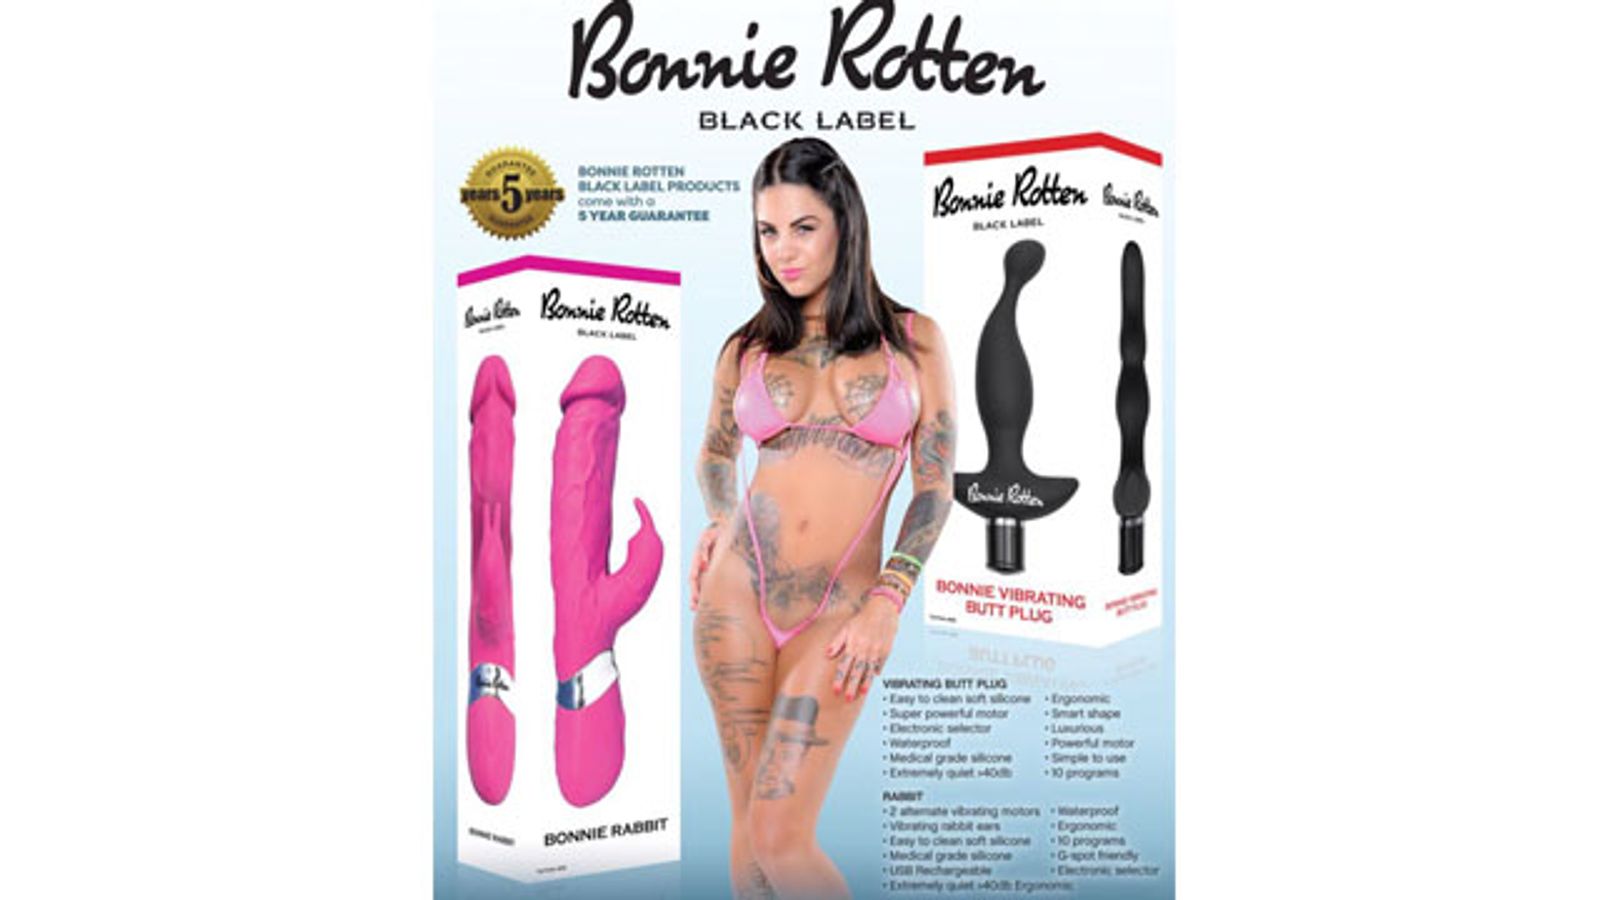 New Pleasure Products Coming Soon From Bonnie Rotten